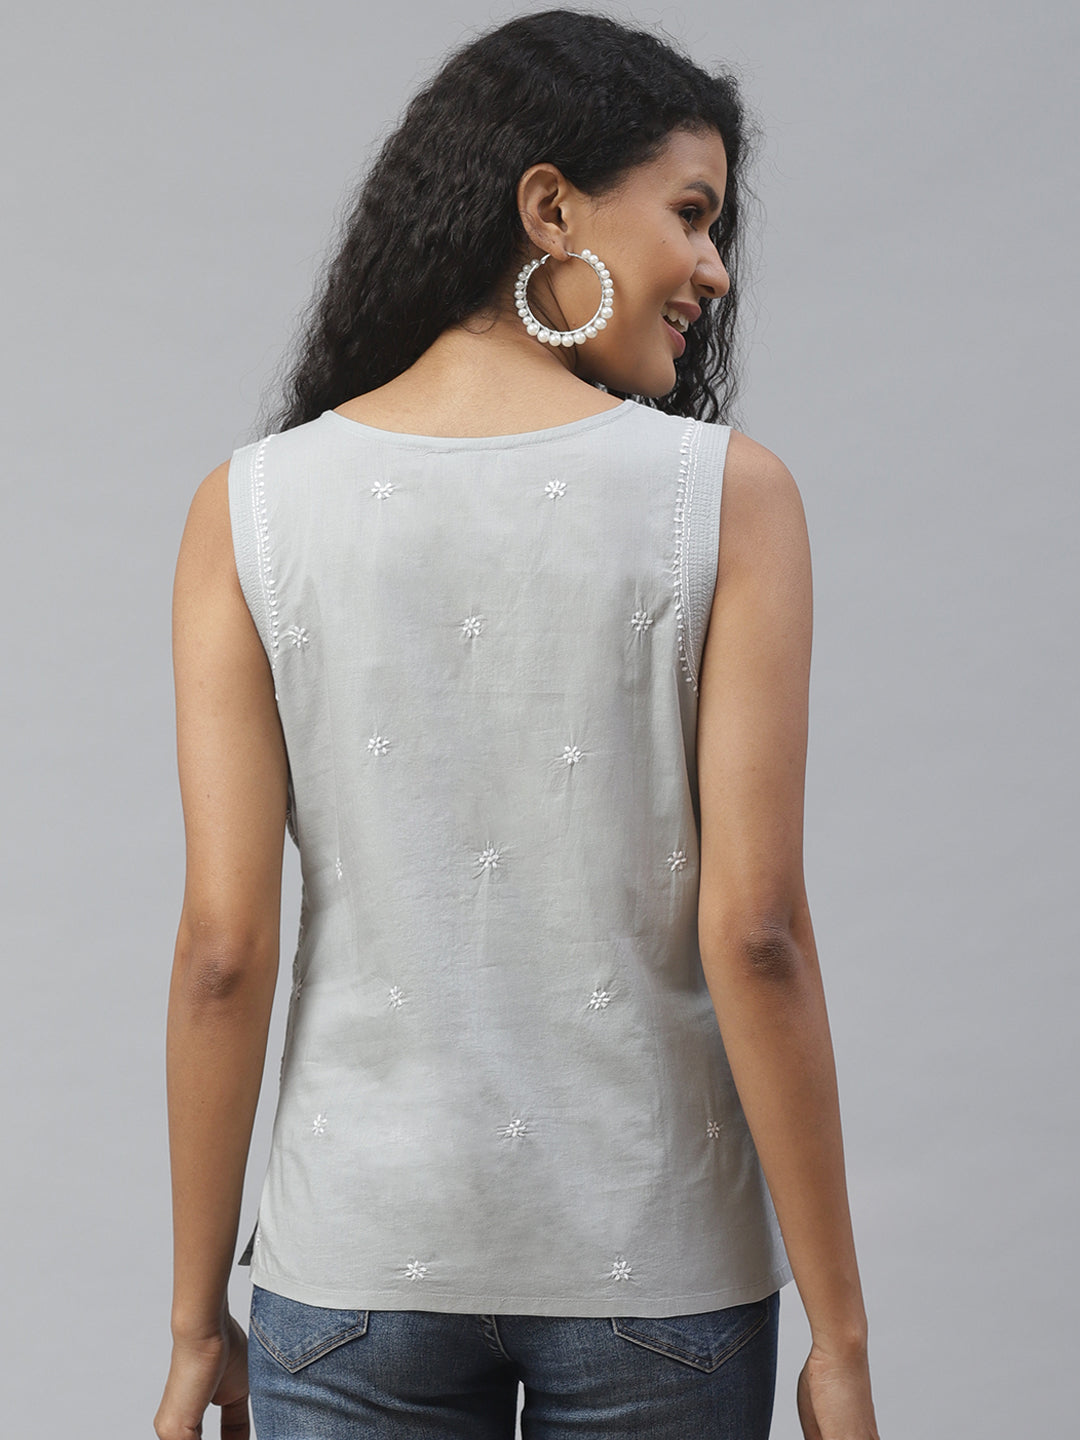 Grey V-Neck Embroidered Sleeveless Top